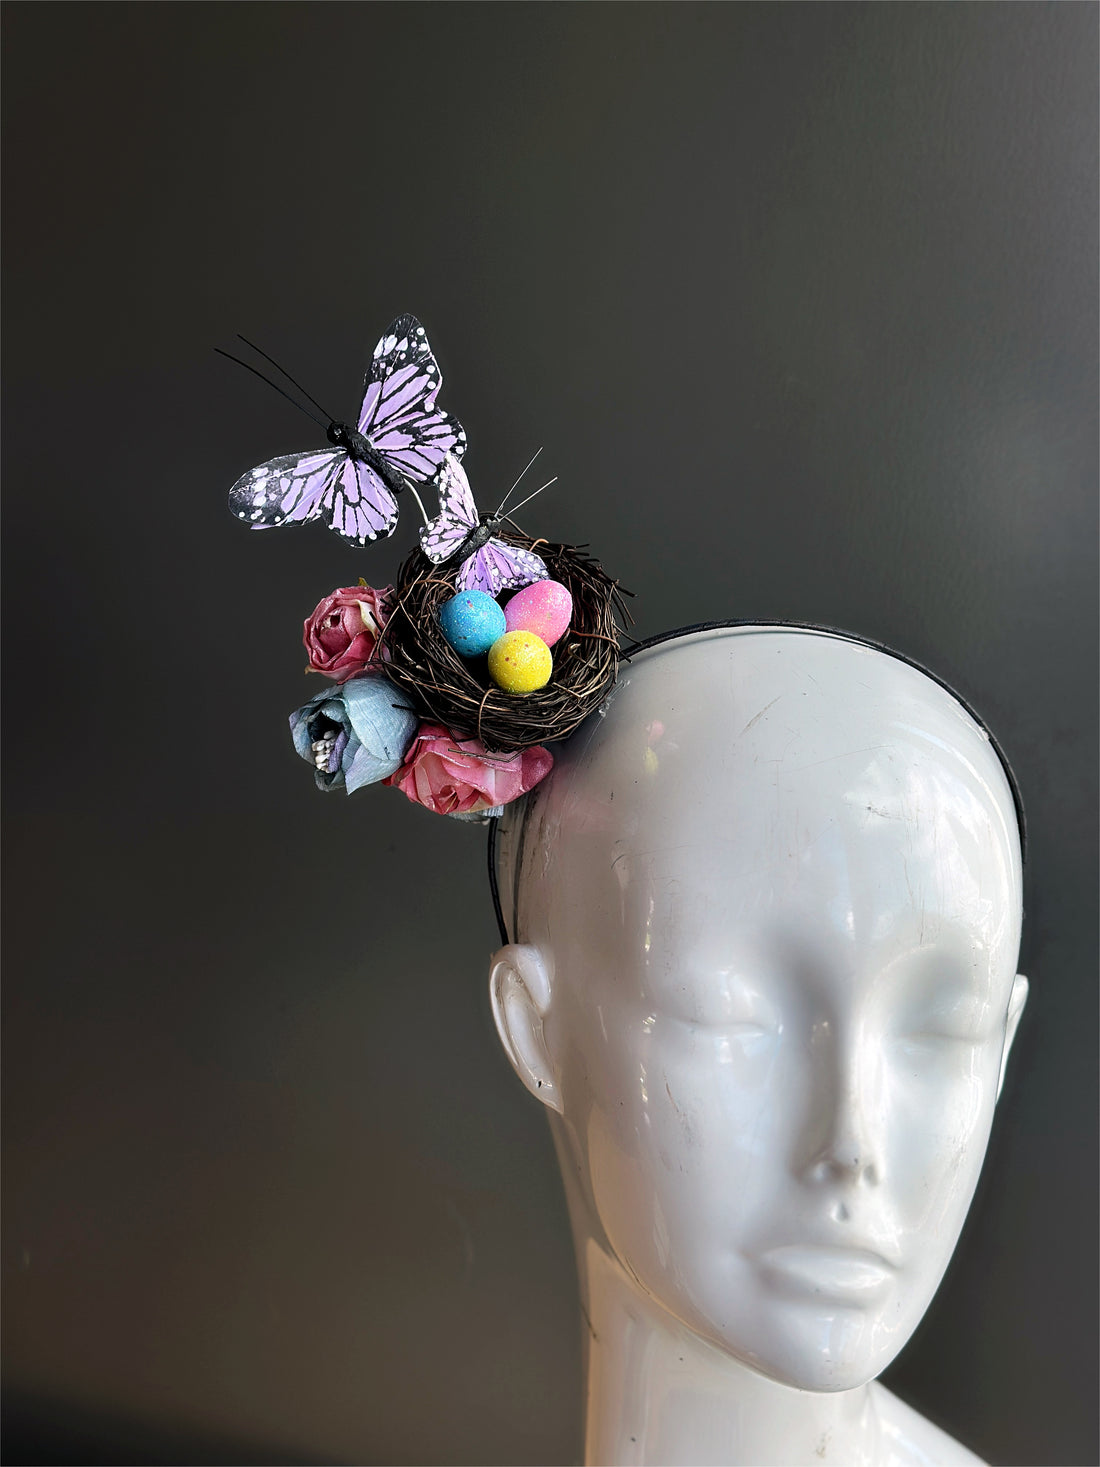 Headband with a nest full of colorful Easter eggs, purple butterflies, and flowers.